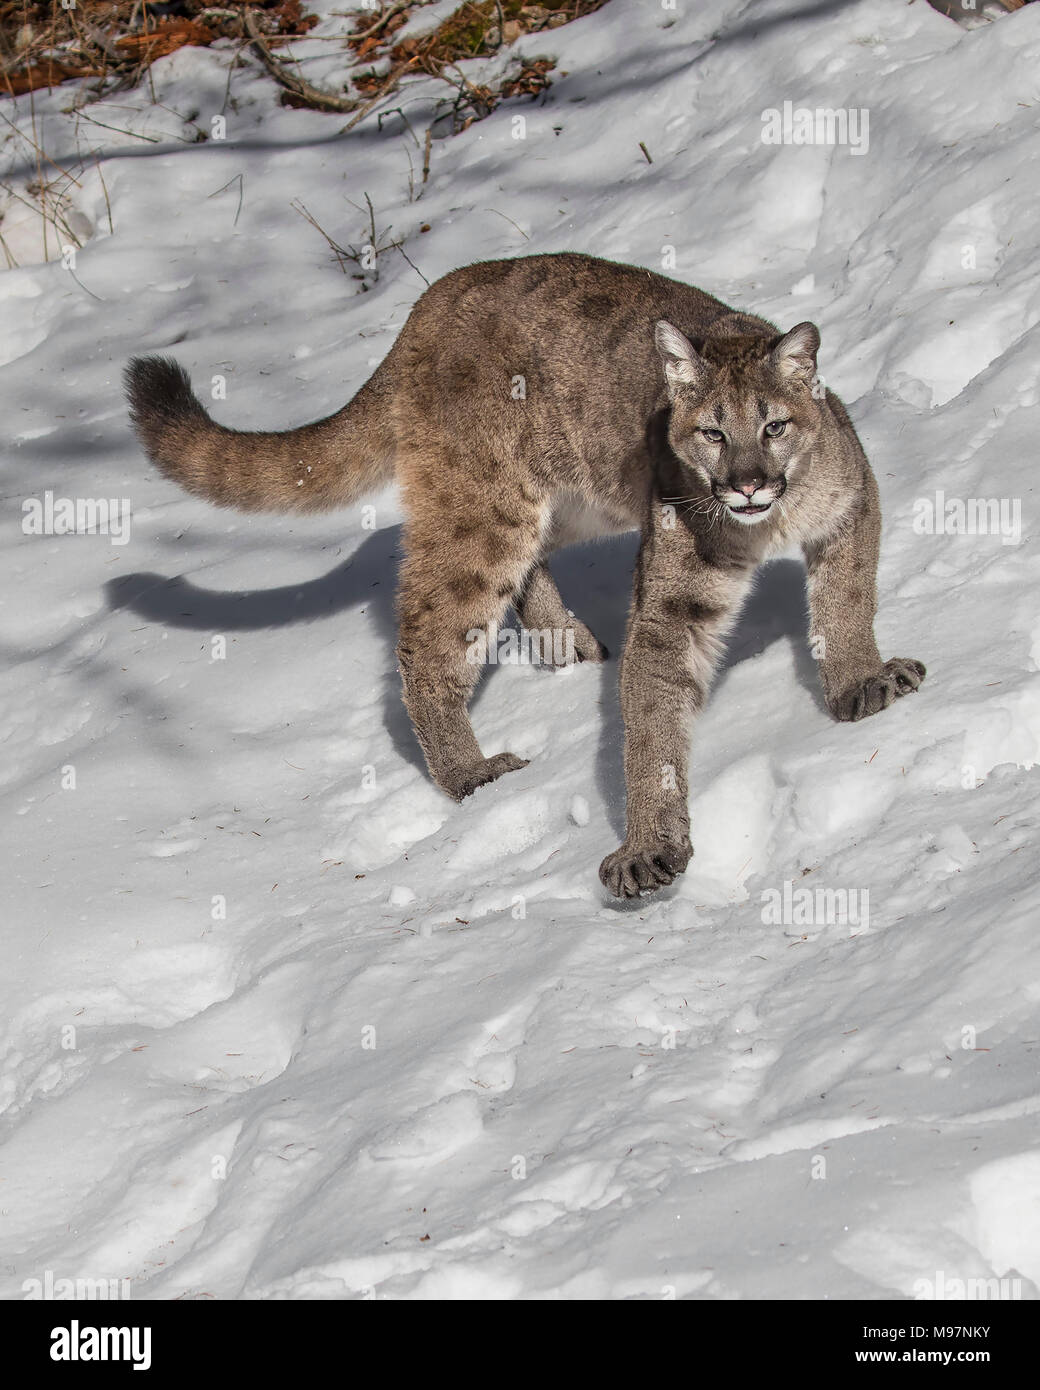 Mountain Lion Cub High Resolution Stock Photography And Images Alamy